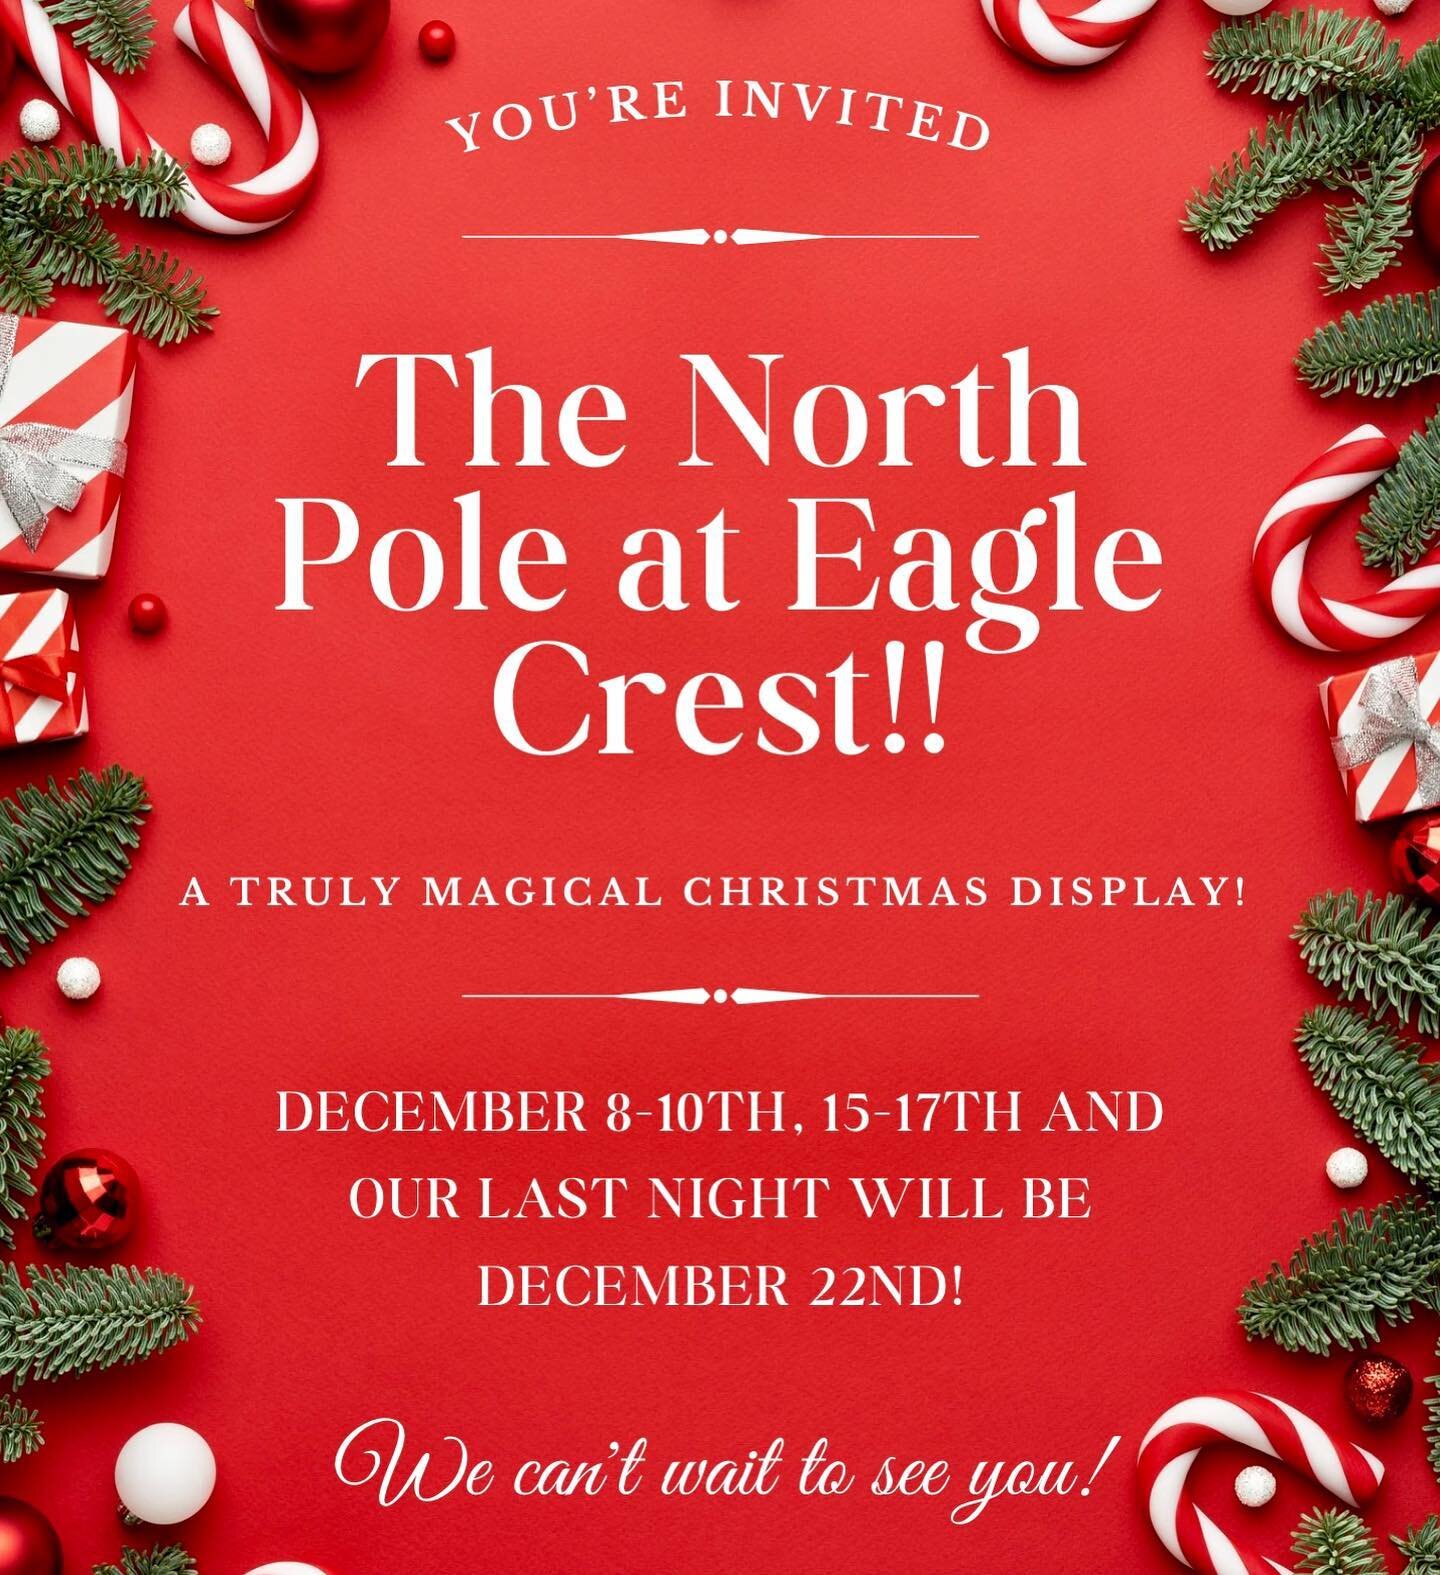 We can&rsquo;t believe opening night is only 12 days away!!! It&rsquo;s crunch time!! Looking forward to welcoming you all to our 2023 display!! Happy Holidays!!! 🎅🏼
***Please Share***
.
.
.
.
.
.
.
.
.

#christmasateaglecrest #christmas #christmas